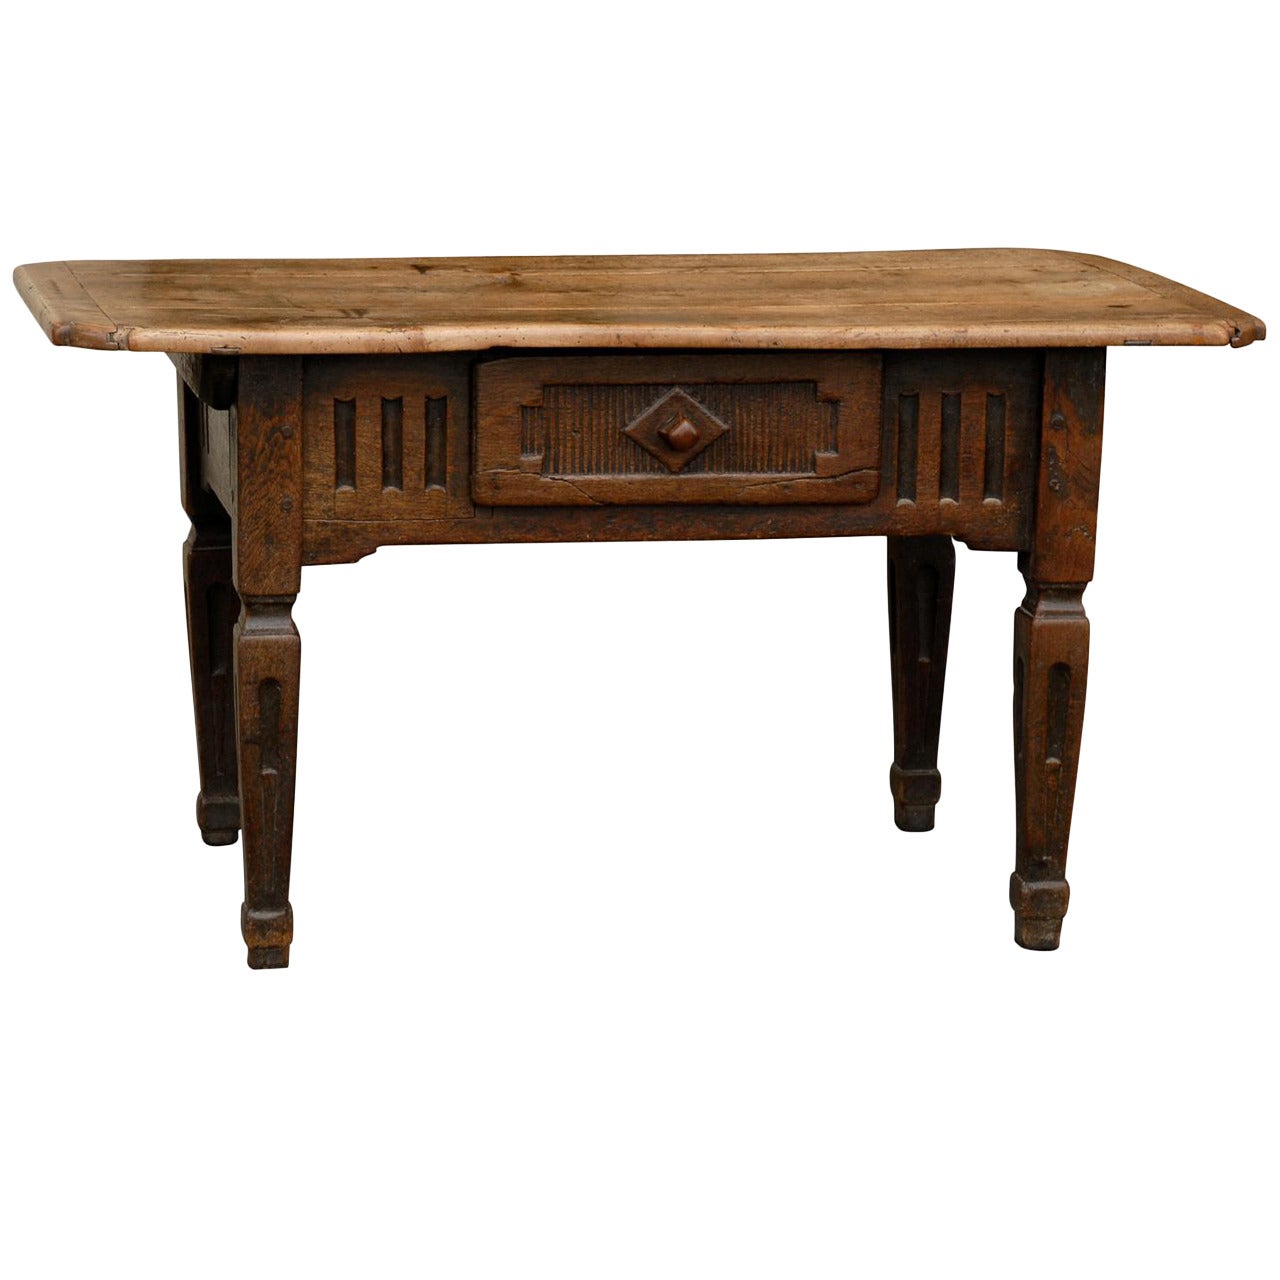 Italian Country Table with Single Drawer, Carved Apron, Tapered Legs, circa 1800 For Sale